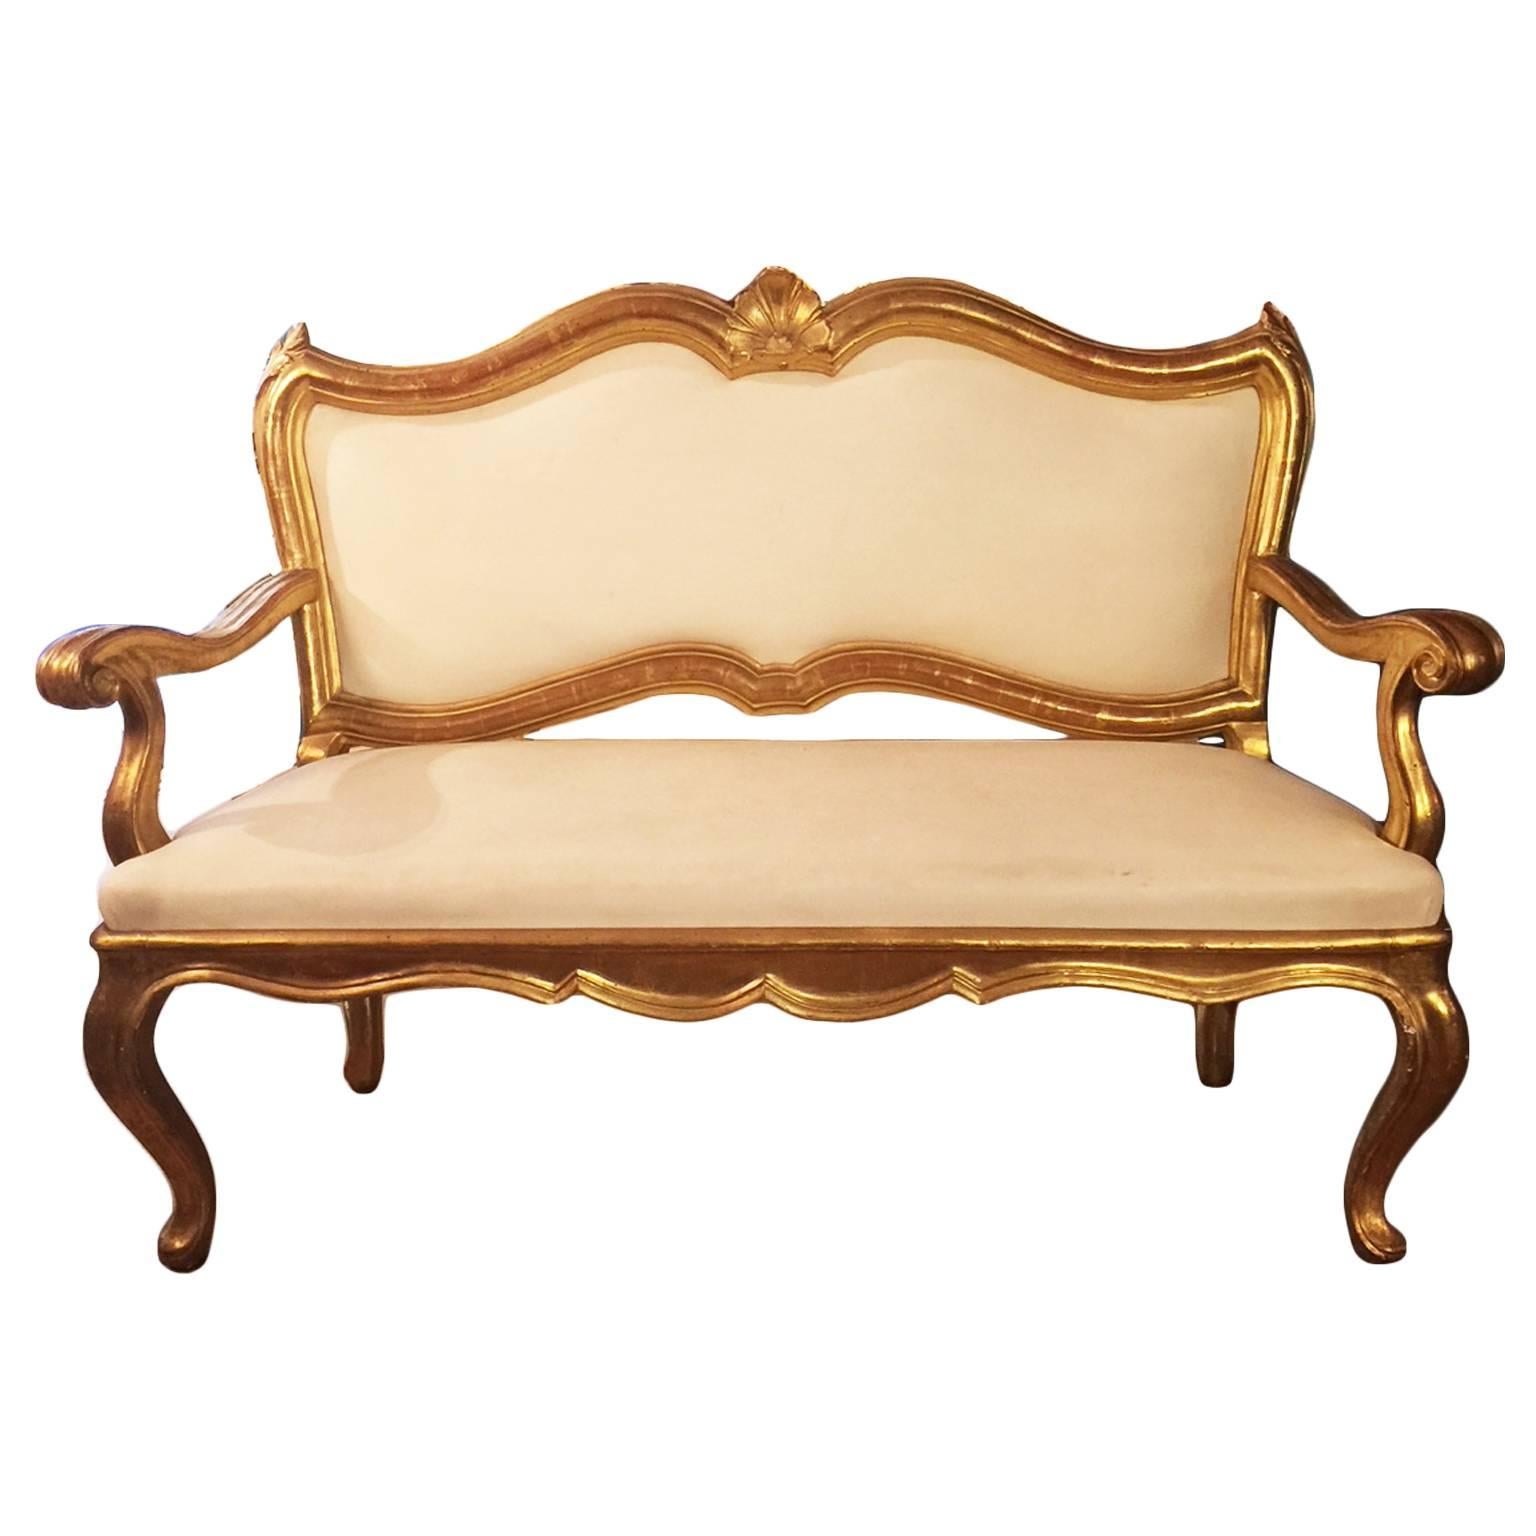 Mid-18th Century Italian Louis XV Upholstered Carved Giltwood Sofa or Canapé For Sale 2